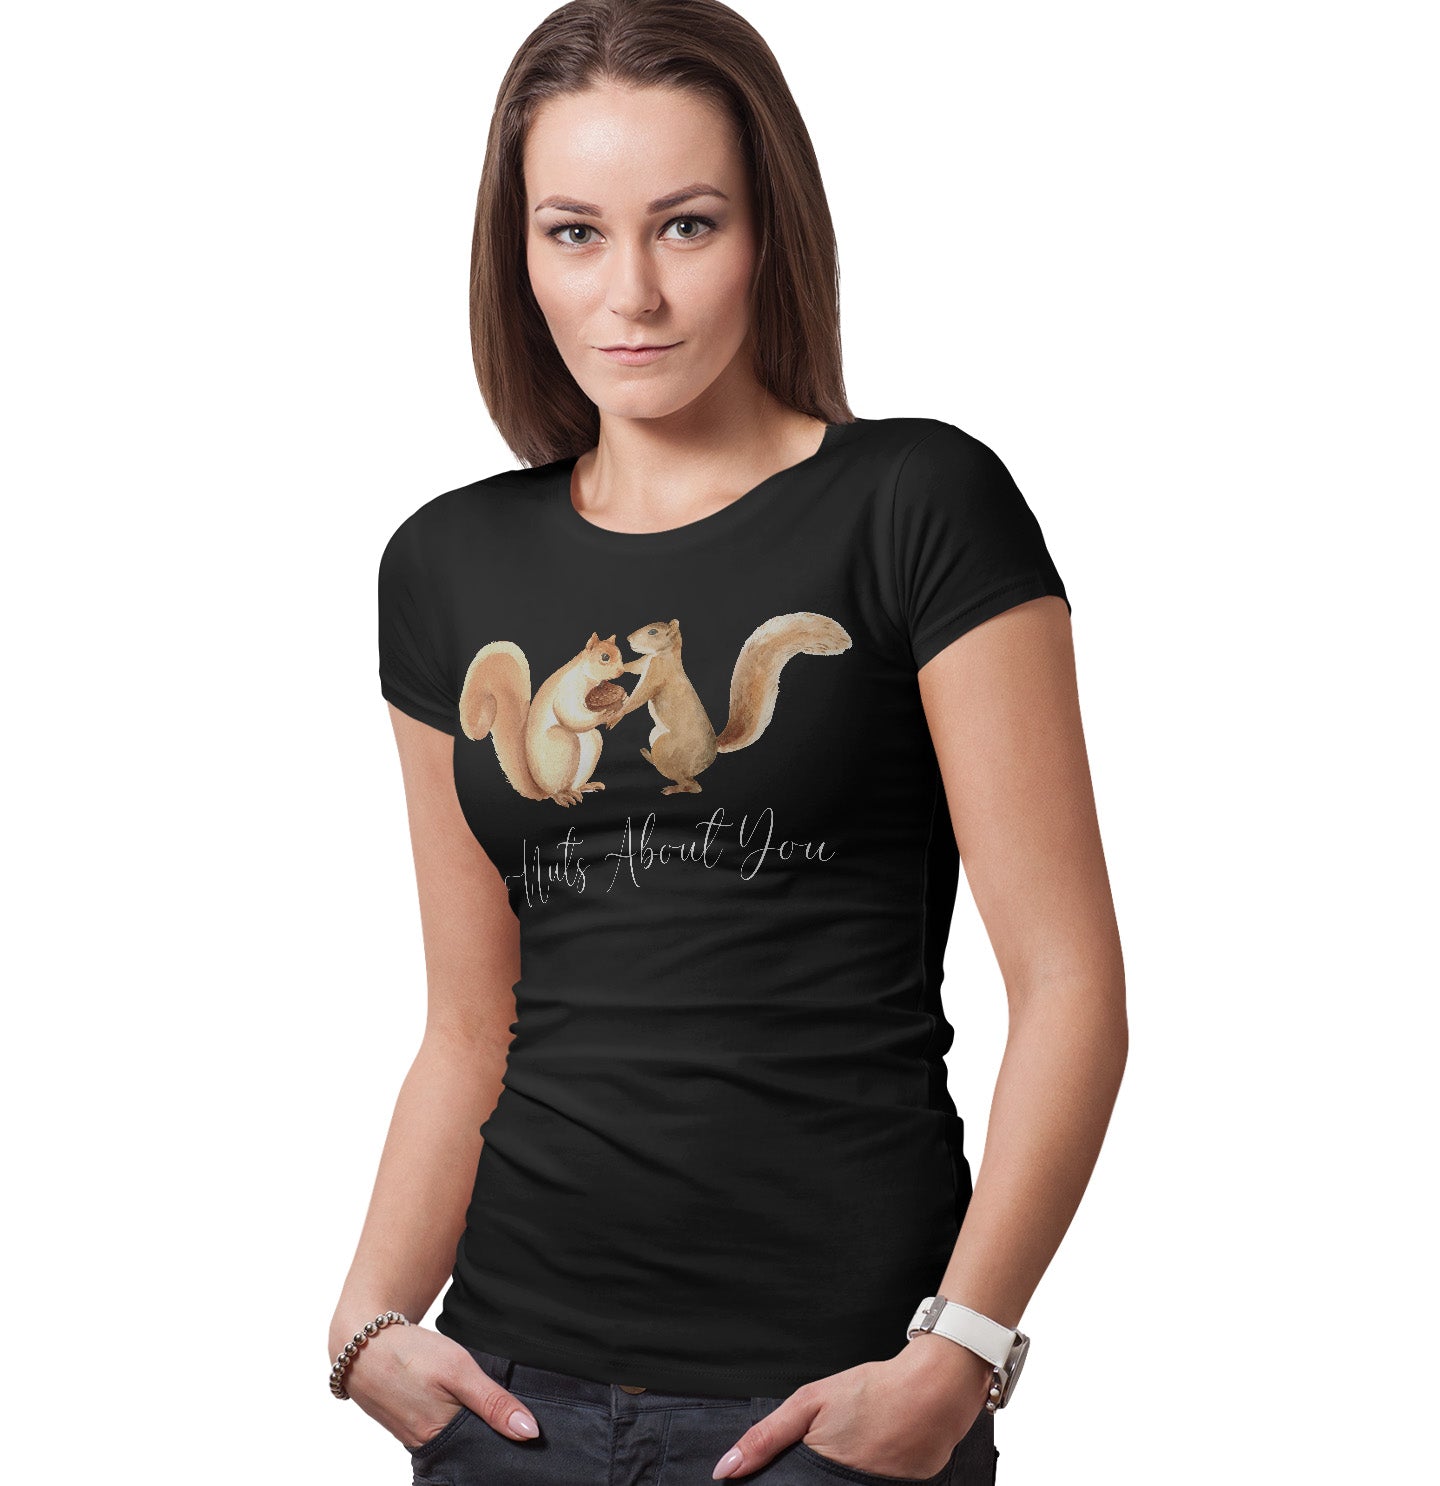 Nuts About You - Women's Fitted T-Shirt